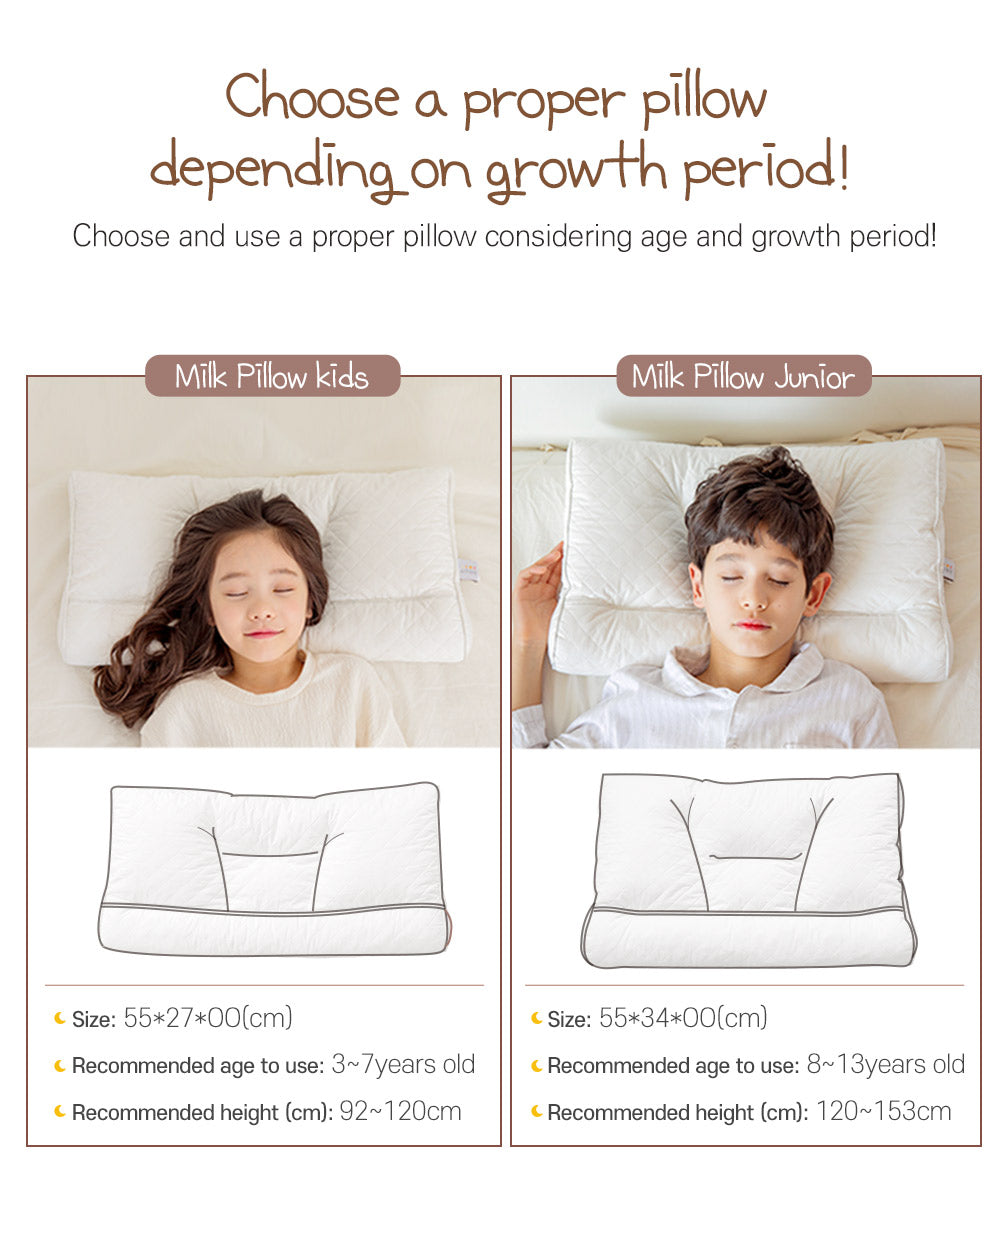 Choose and use a proper pillow considering age and growth period.